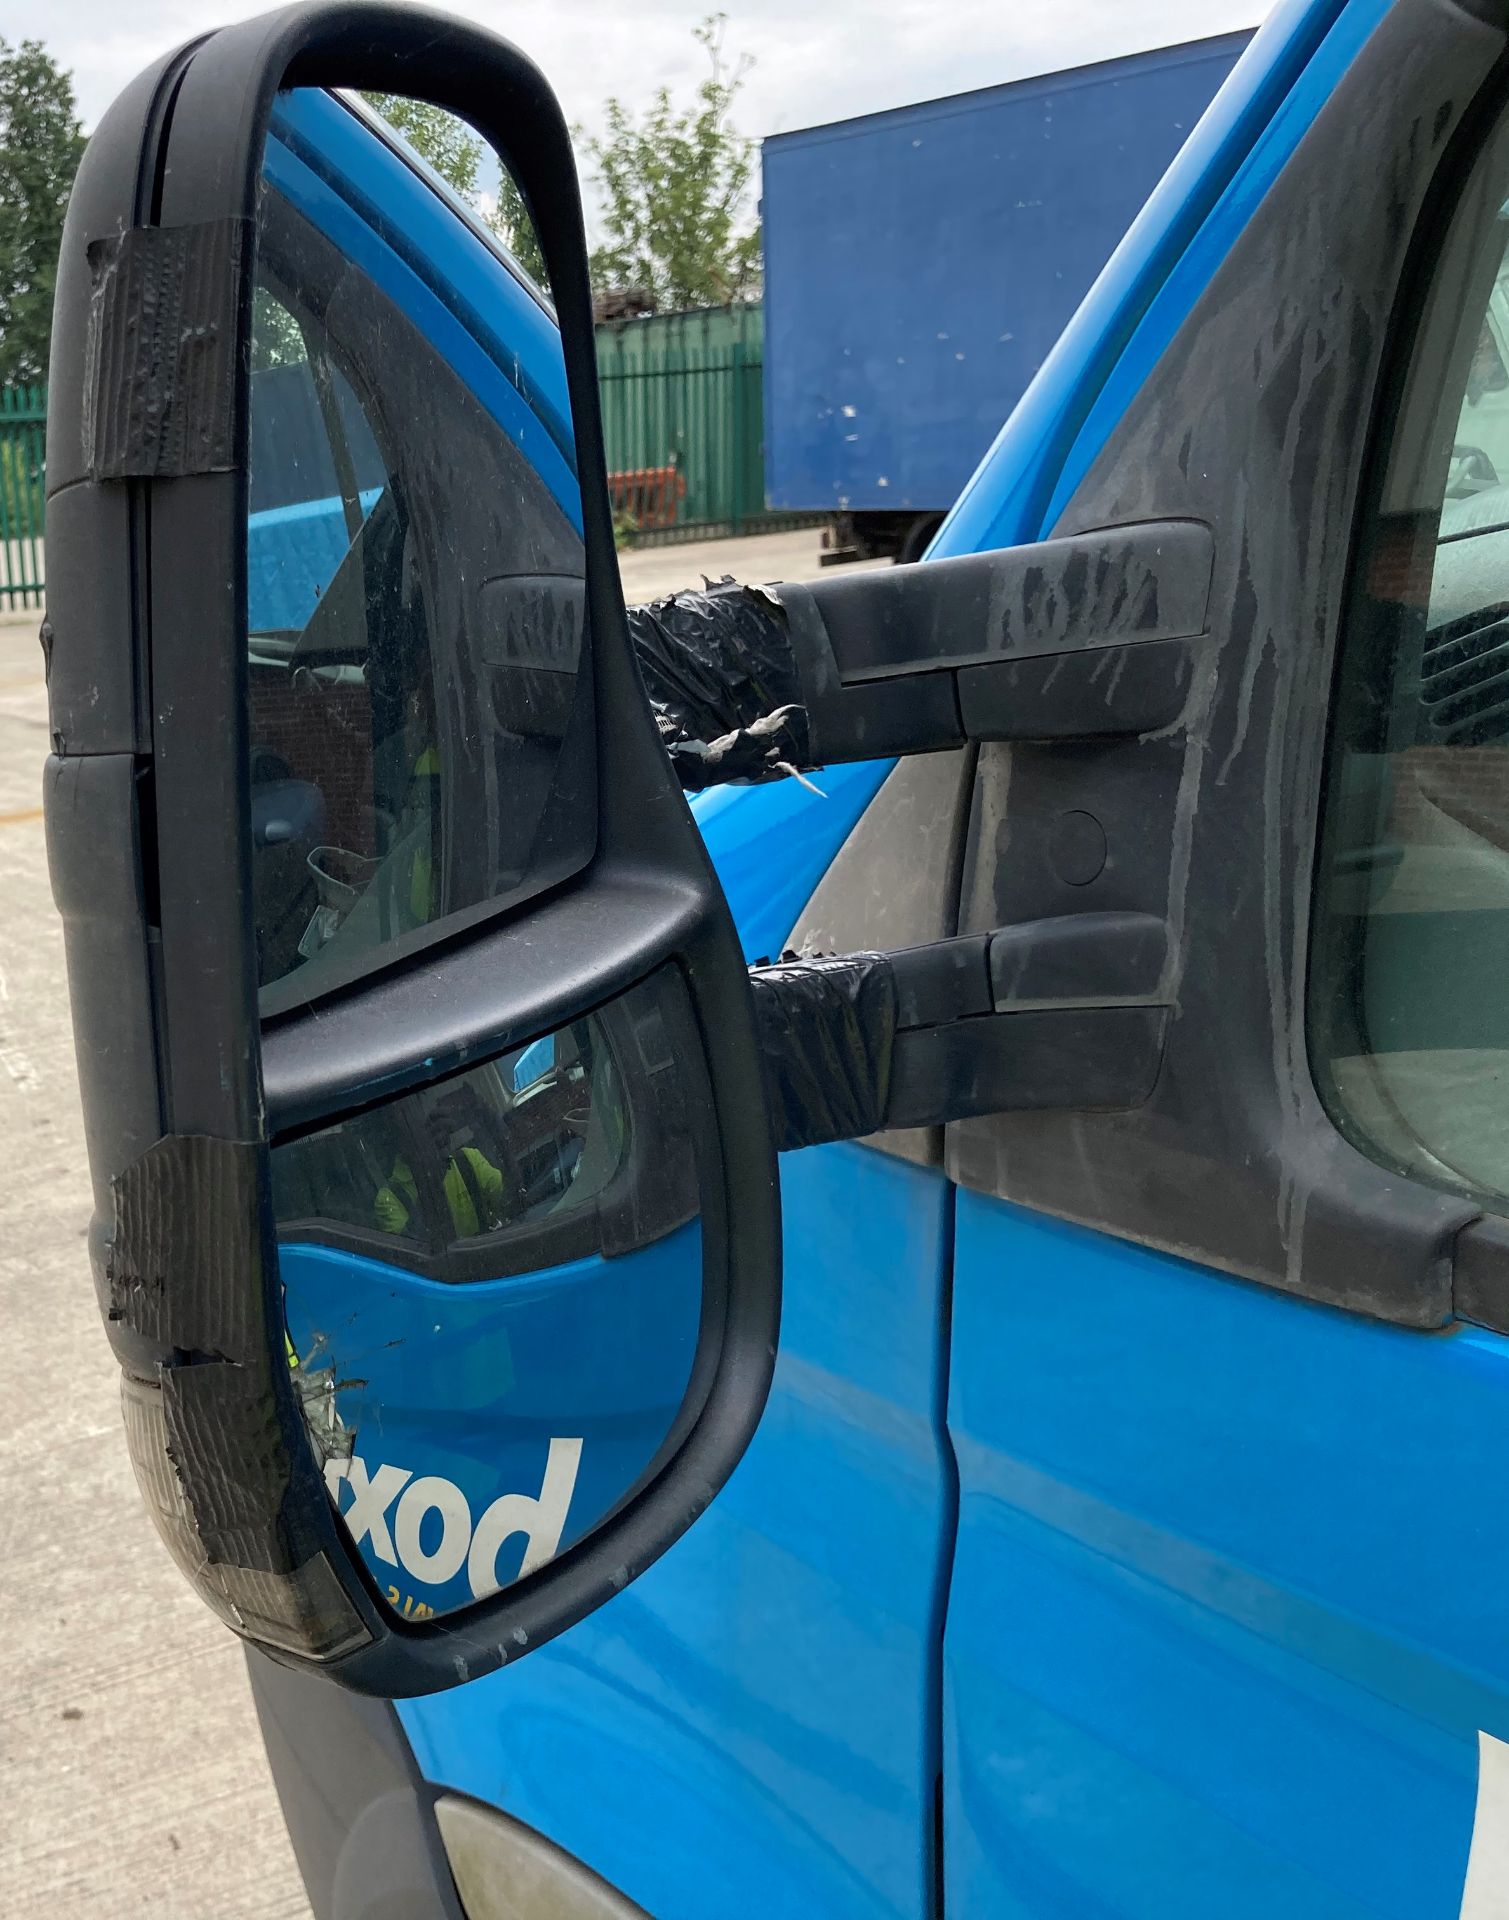 ON INSTRUCTIONS OF AN ENFORCEMENT OFFICER IVECO DAILY 2.31 HPI BOX VAN - diesel - blue Reg. - Image 9 of 15